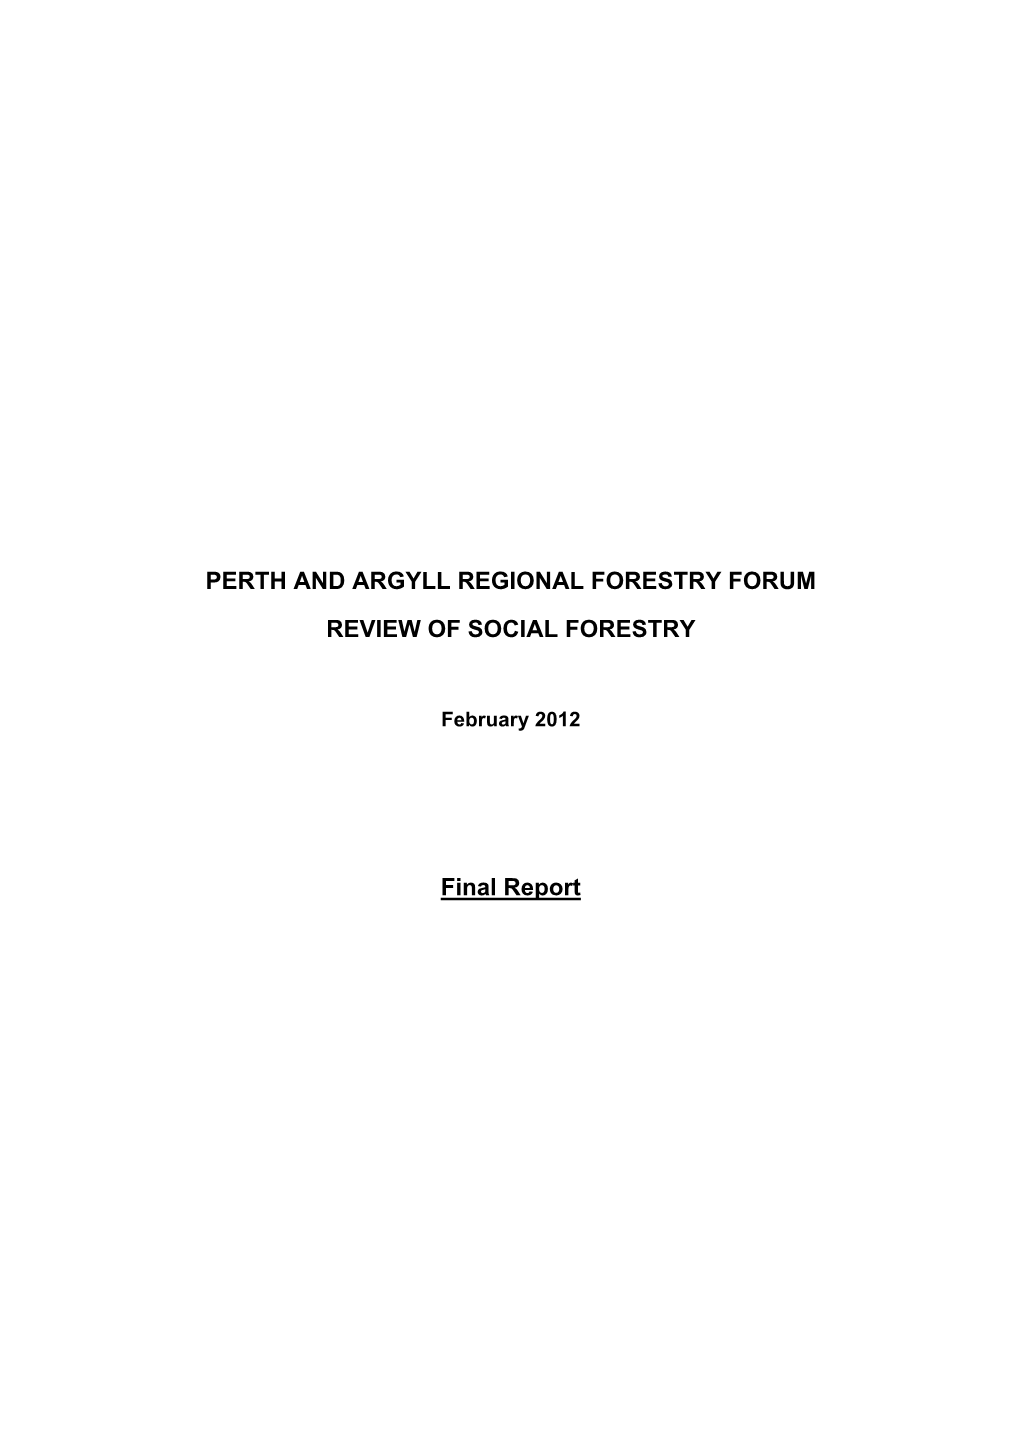 Perth and Argyll Regional Forestry Forum